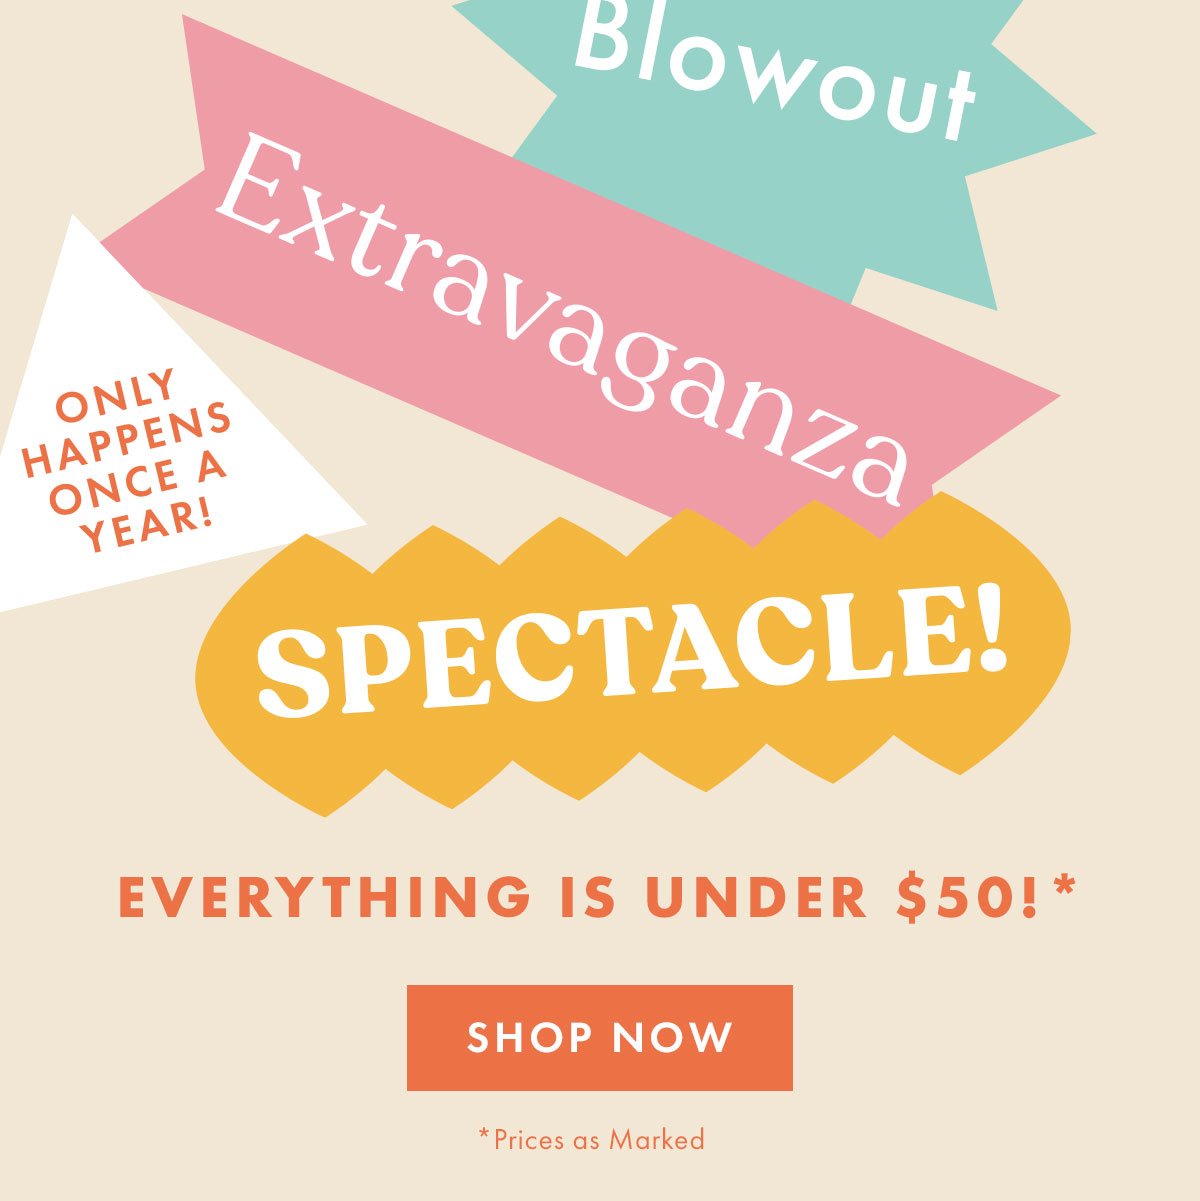 Warehouse Blowout Extravaganza Spectacle!